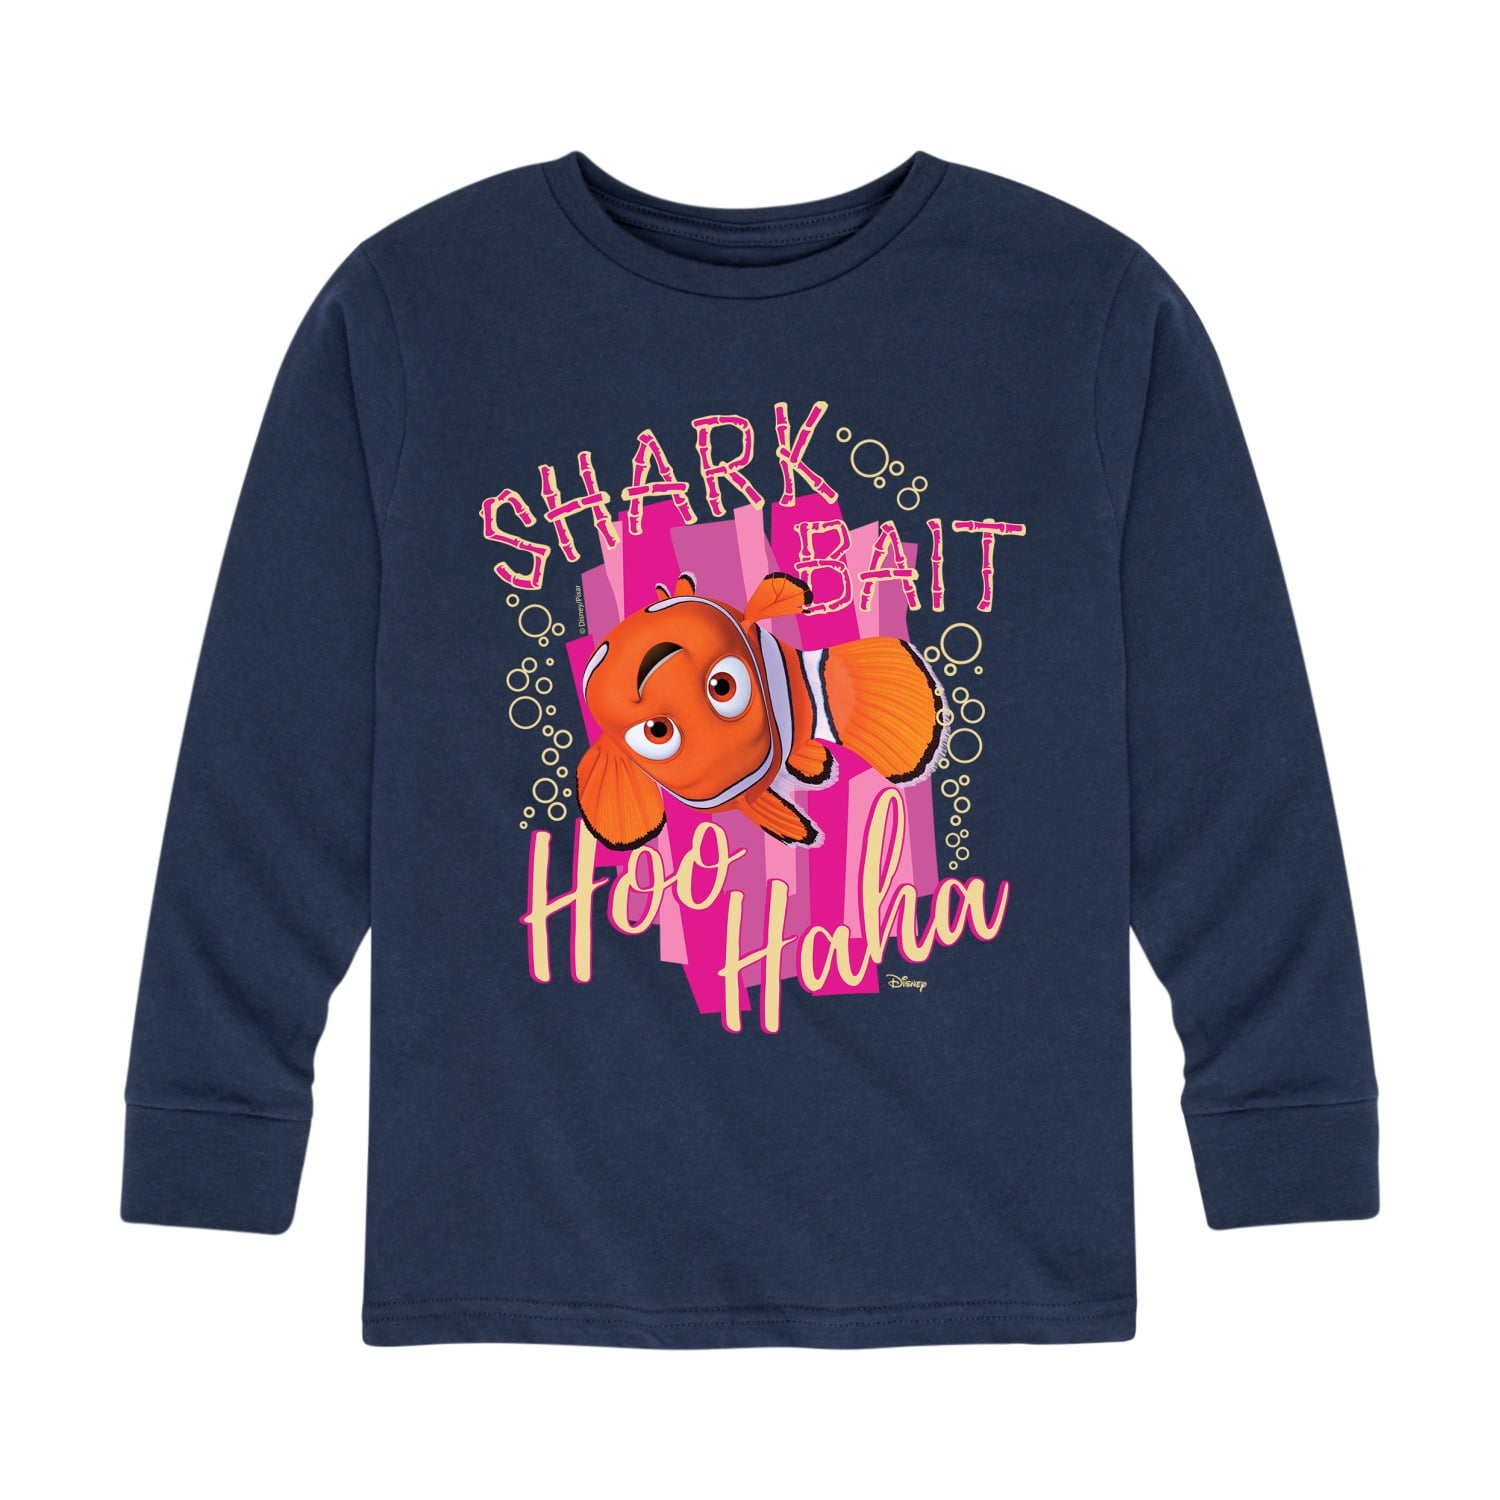 Finding Nemo - Shark Bait Hoo Haha - Toddler And Youth Long Sleeve Graphic  T-Shirt 